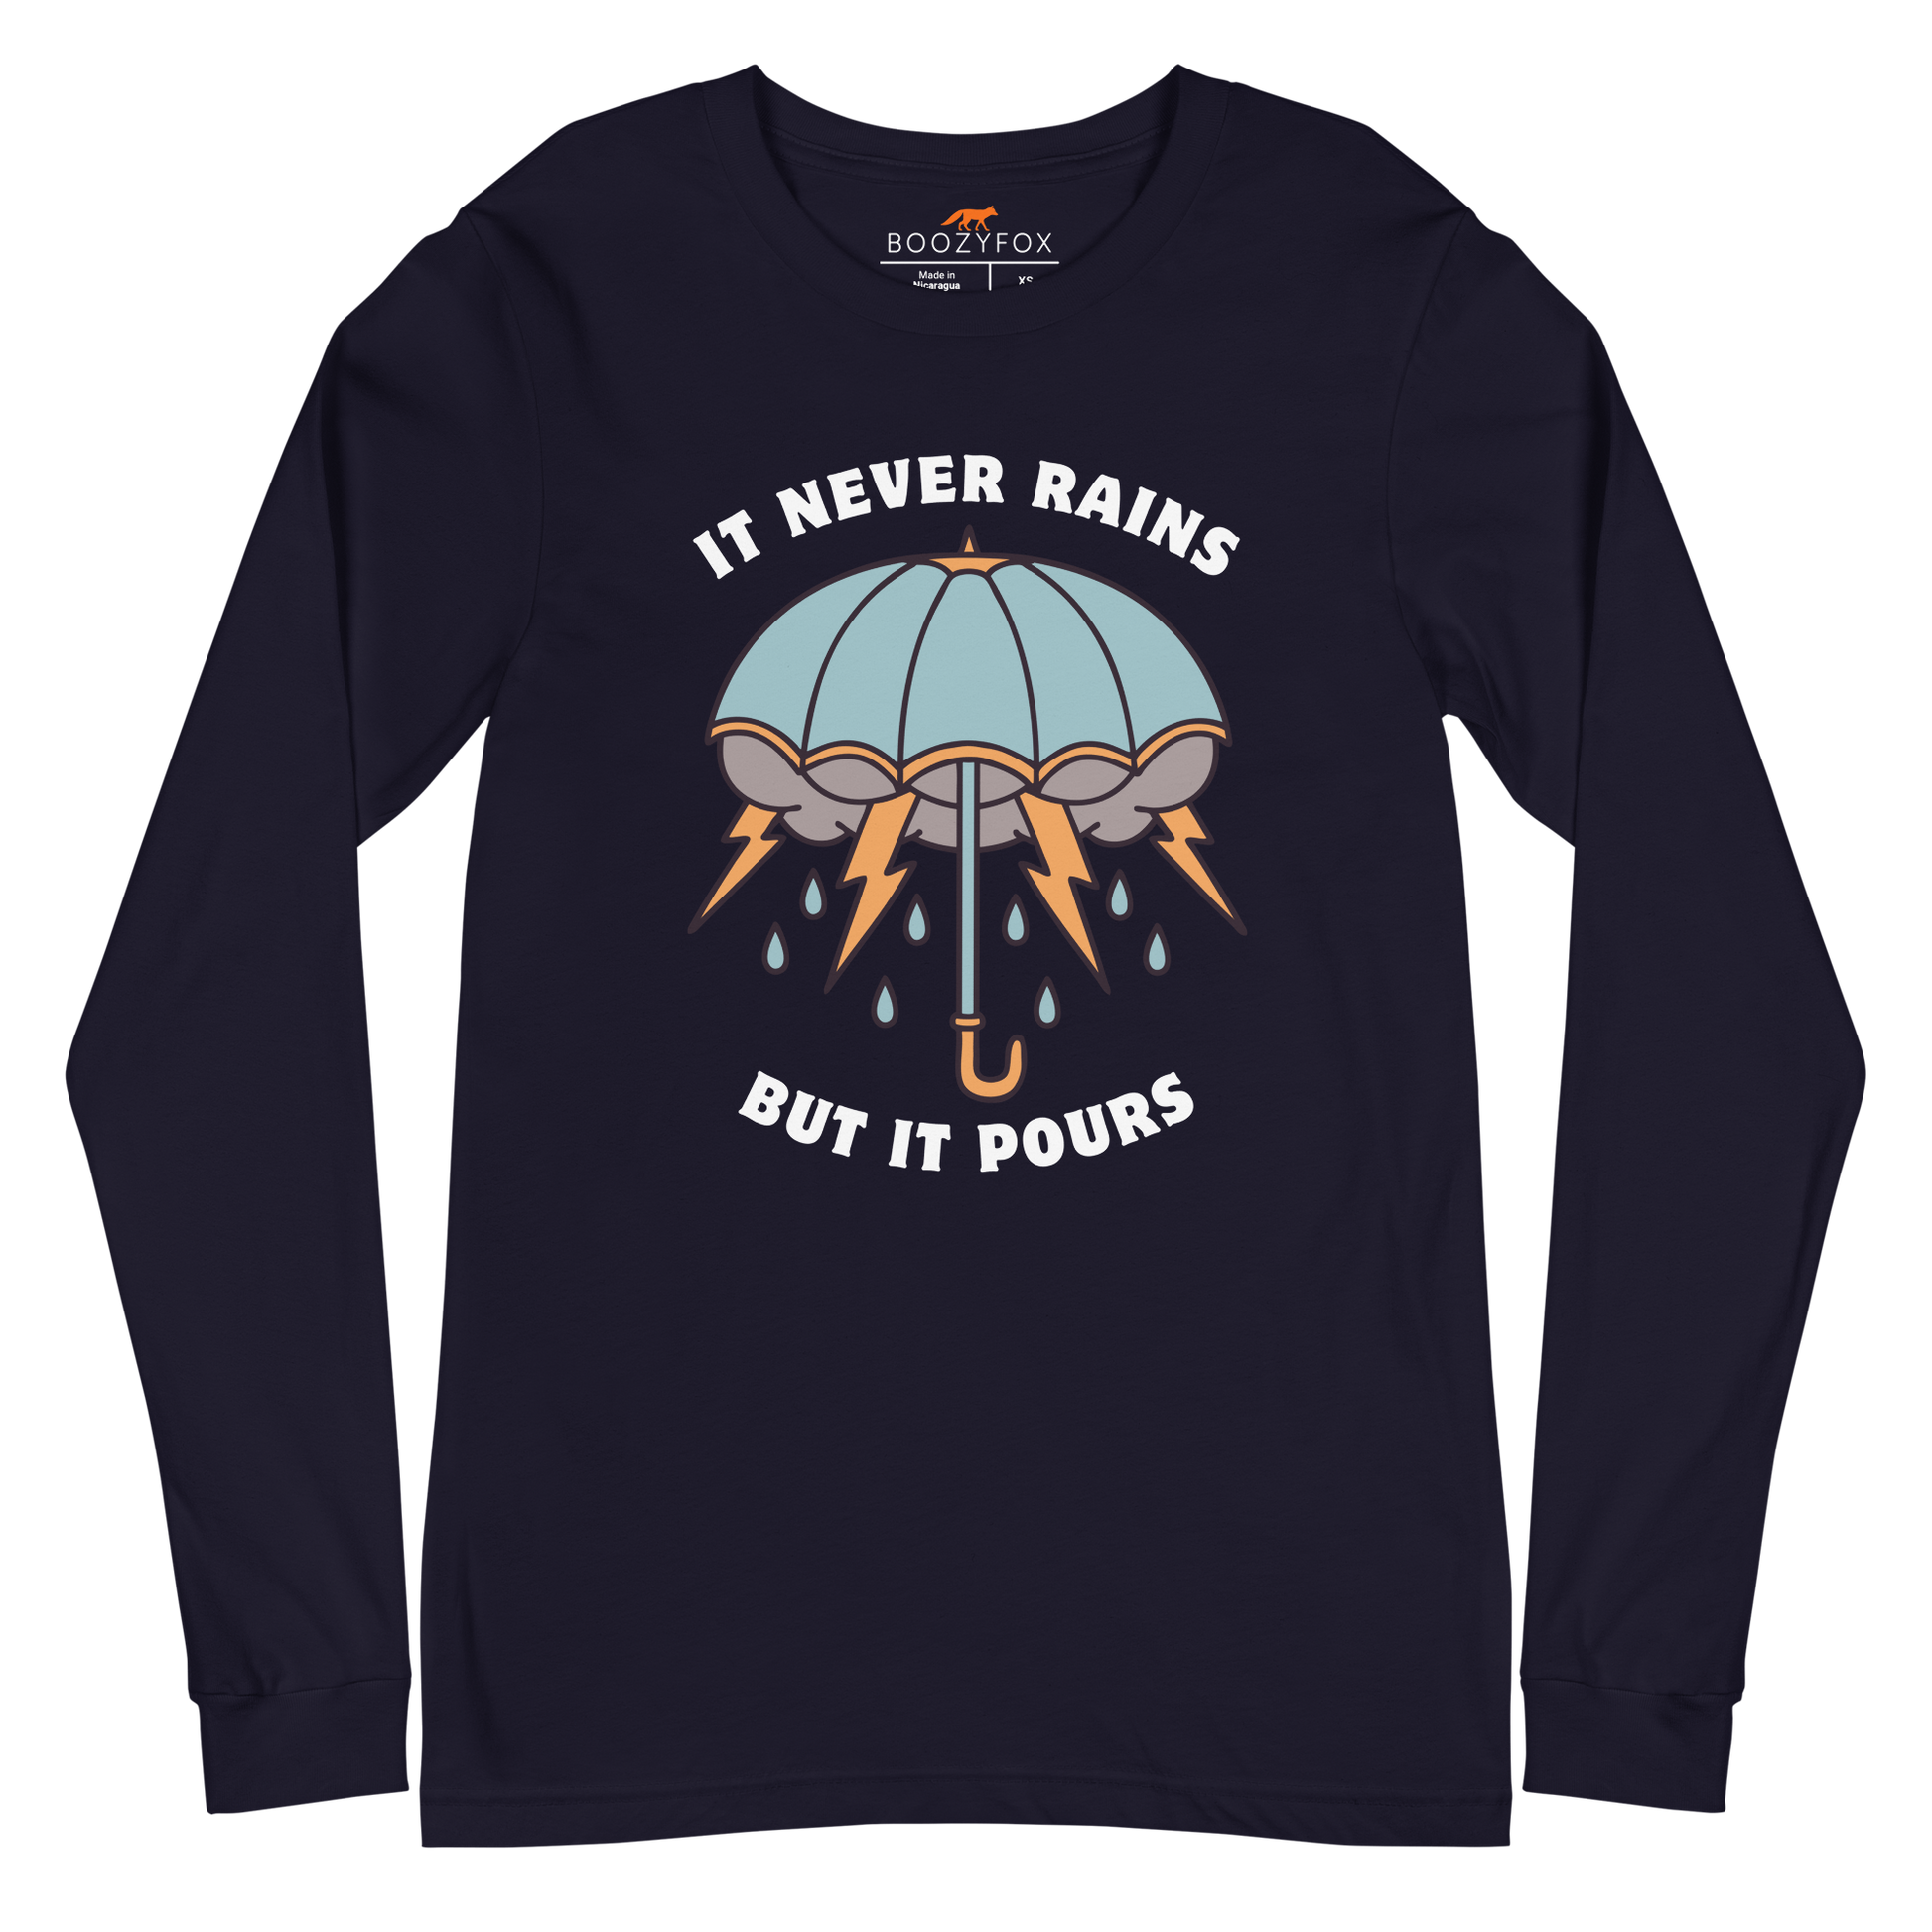 Navy Umbrella Long Sleeve Tee featuring a unique It Never Rains But It Pours graphic on the chest - Cool Tattoo-Inspired Umbrella Long Sleeve Graphic Tees - Boozy Fox